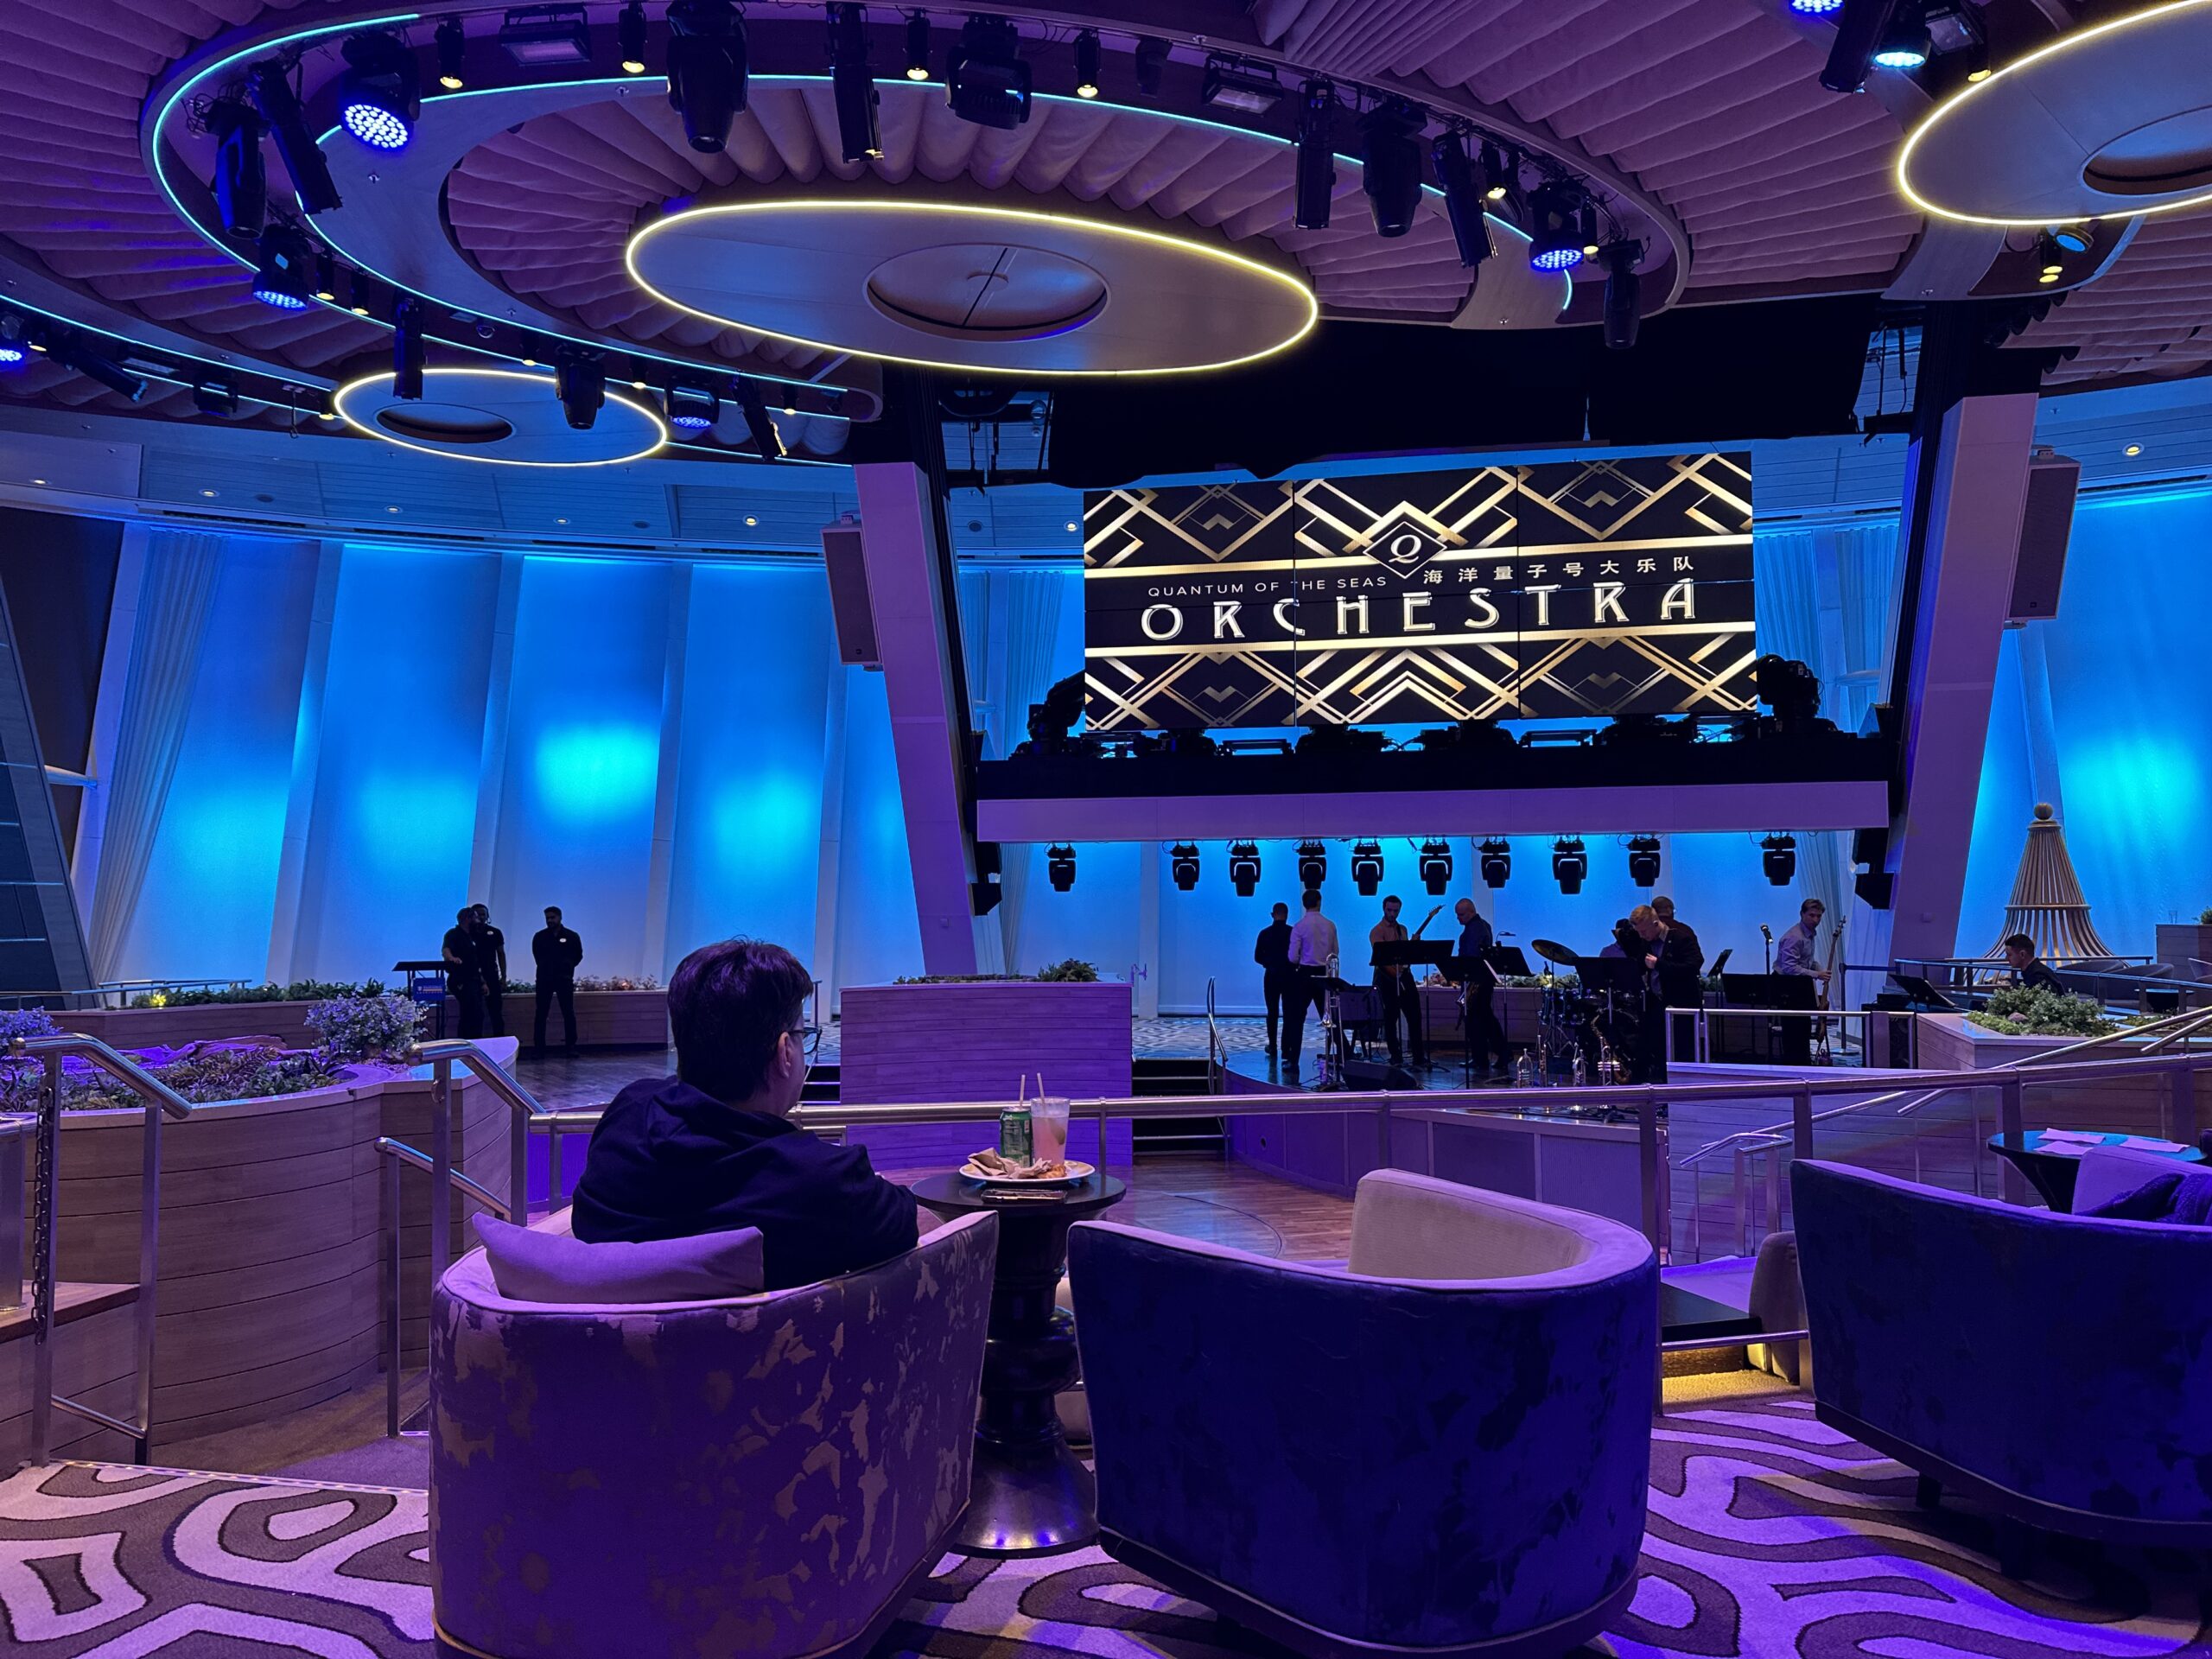 two70 during the orchestra on quantum of the seas